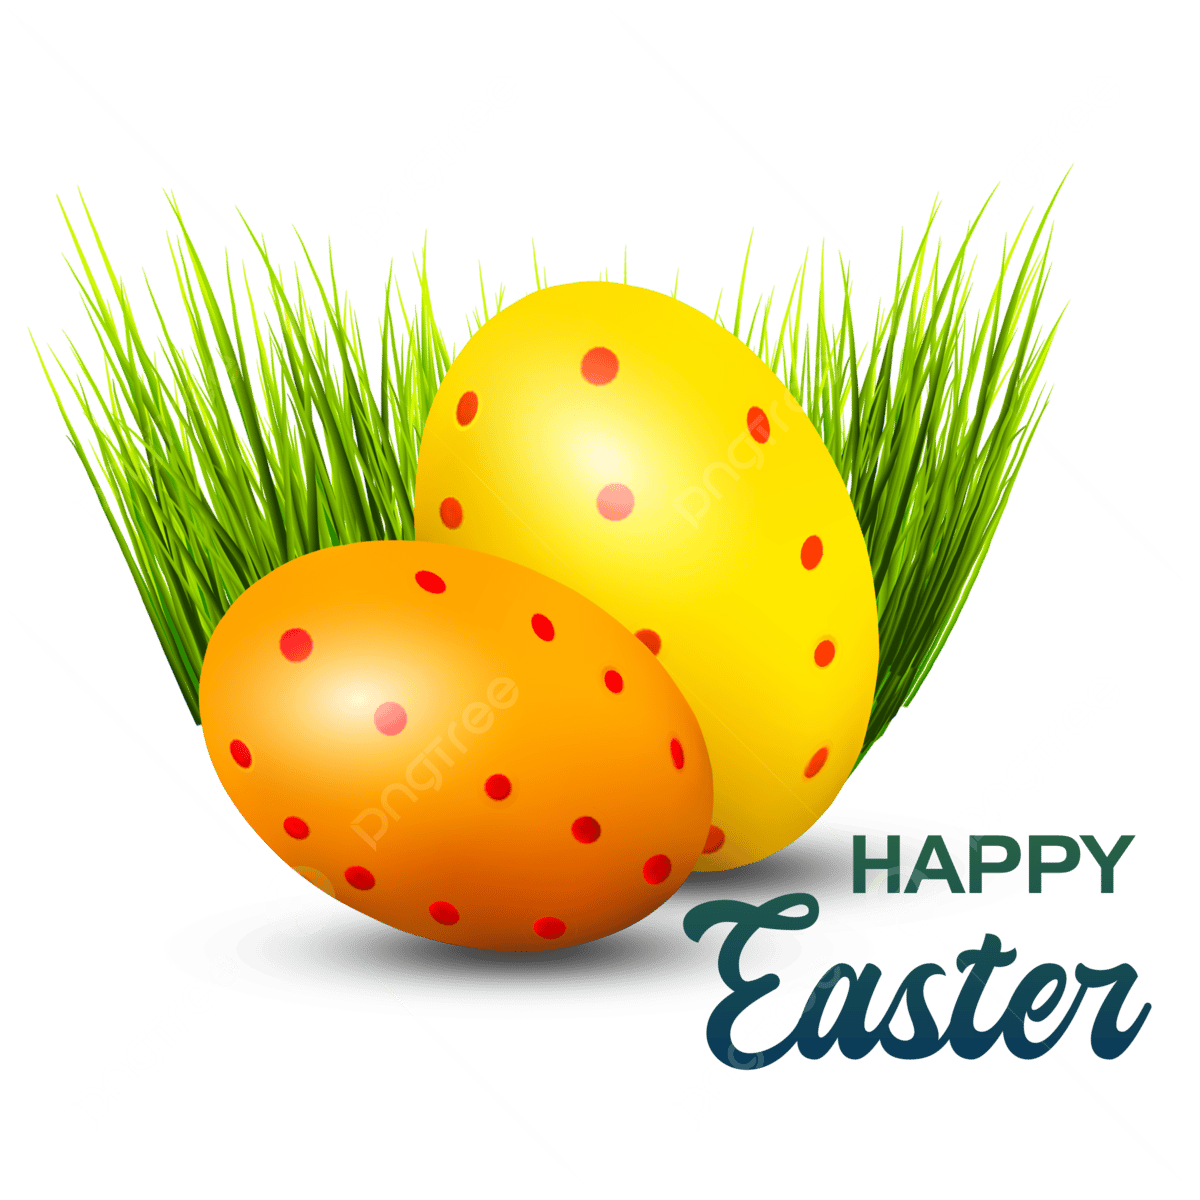 Happy Ester Eggs PNG Transparent, Yellow And Orange Easter Eggs For Happy Ester Day, Easter Clipart, Easter, Egg PNG Image For Free Download